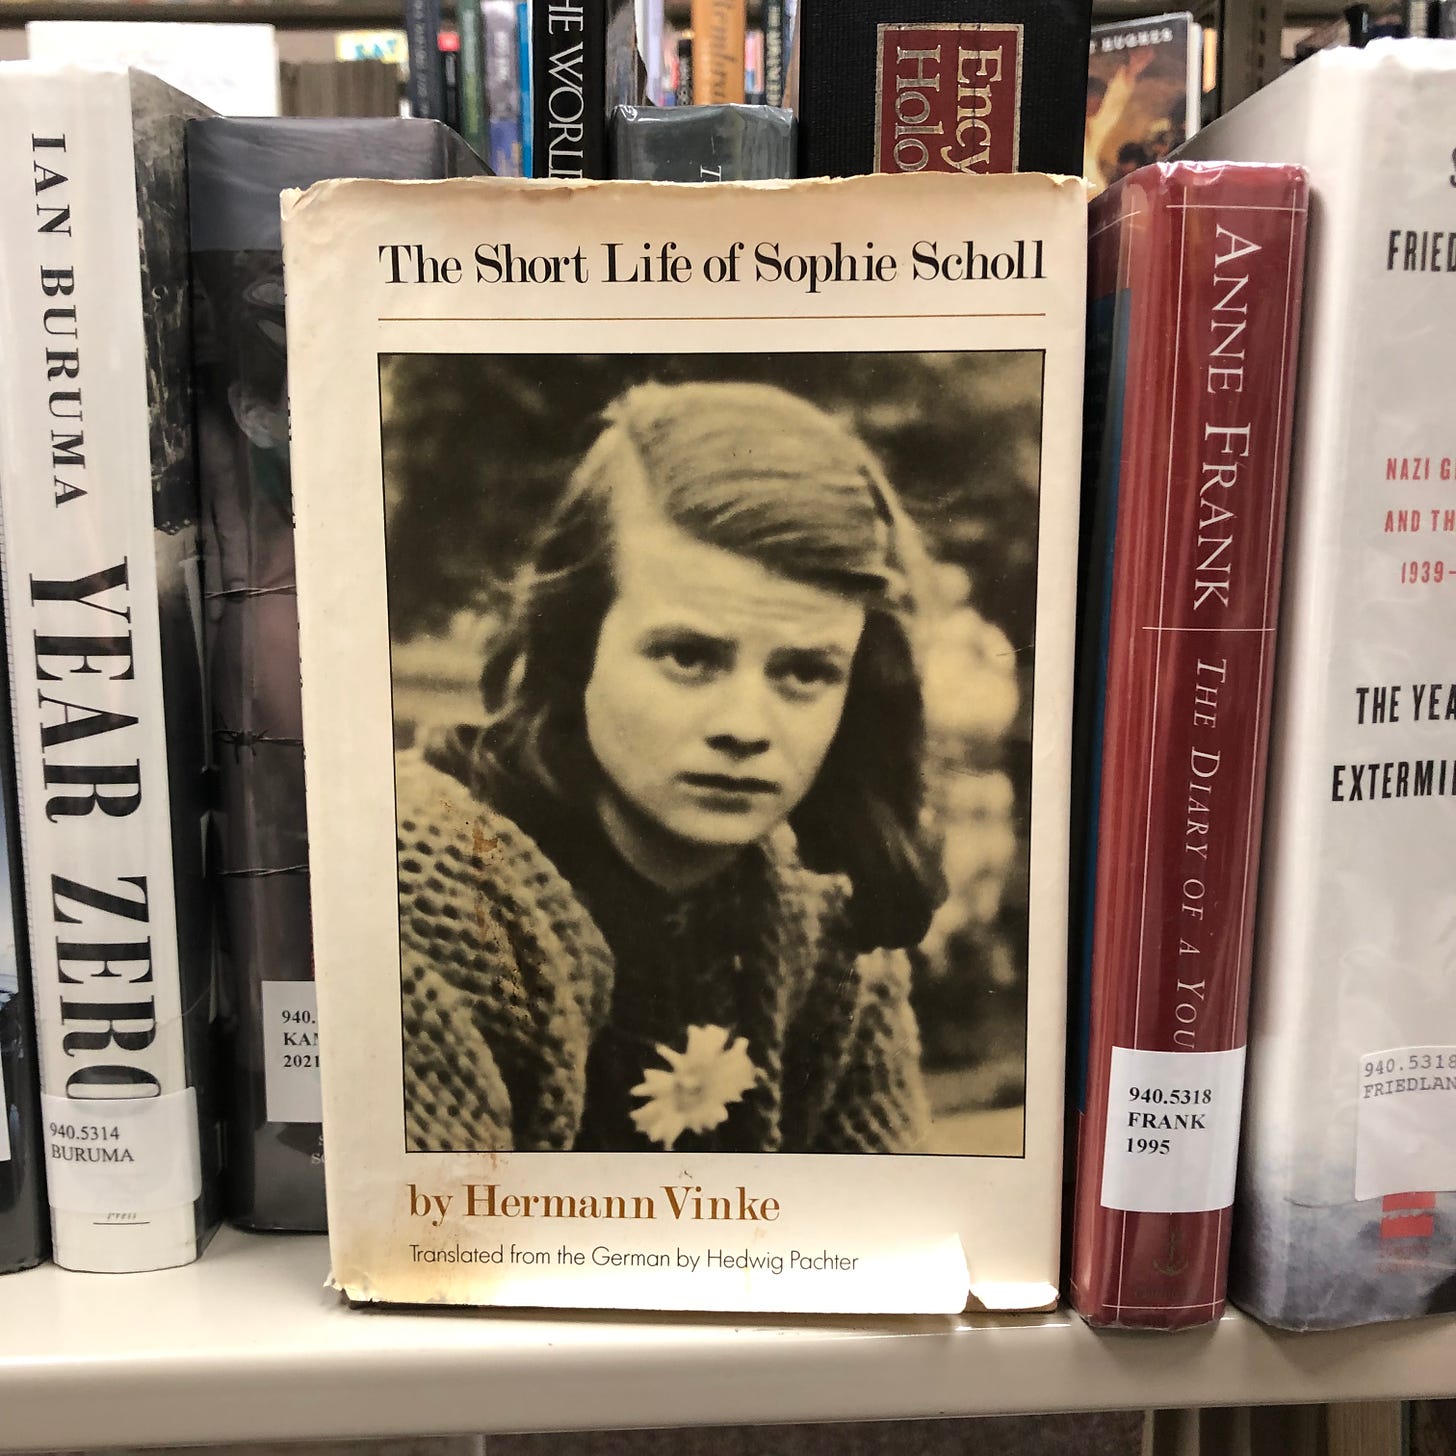 Picture of book on library shelf -- The Short Life of Sophie Scholl by Hermann Vinke, showing the iconic b&w picture of Sophie staring directly out on the front cover.